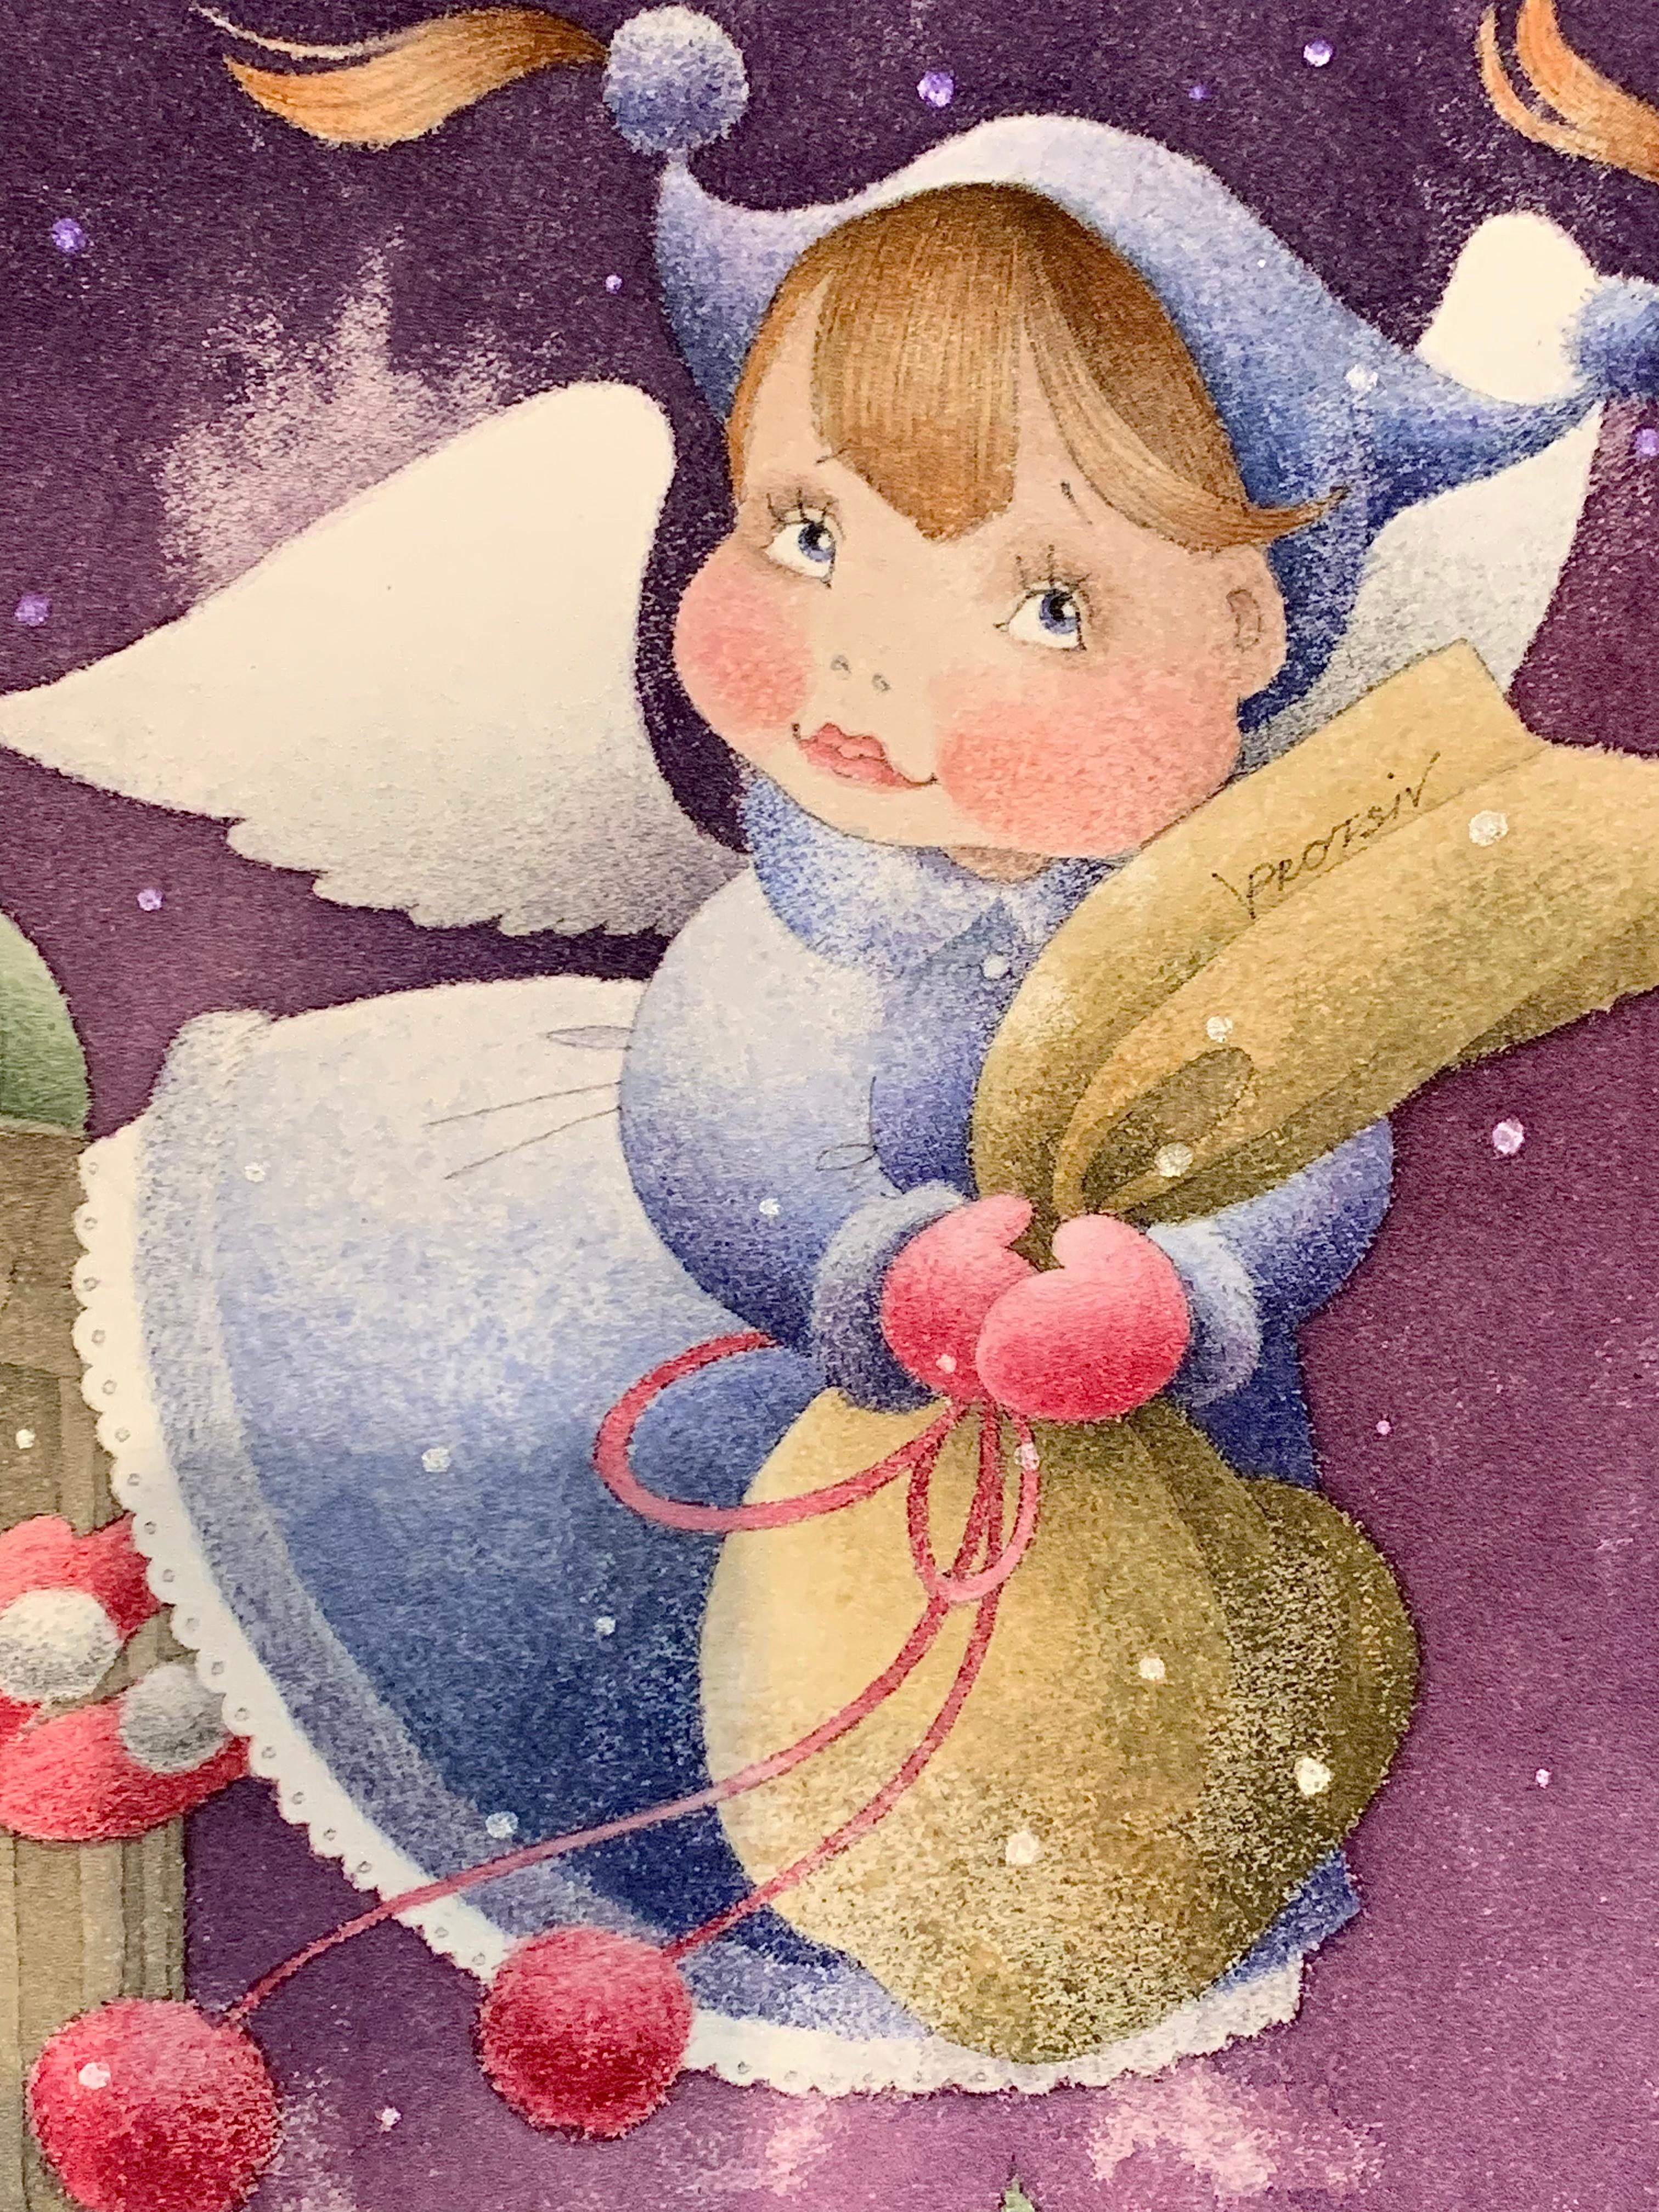 A beautiful and cheerful angel is hovering acoss the roofs of Lviv in front of a changing purple night sky, surrounded by snow flakes and polar lights. 
She is holding a bag full of presents and promise.
Viktoriya Protsiv was born in 1983 in Lviv,